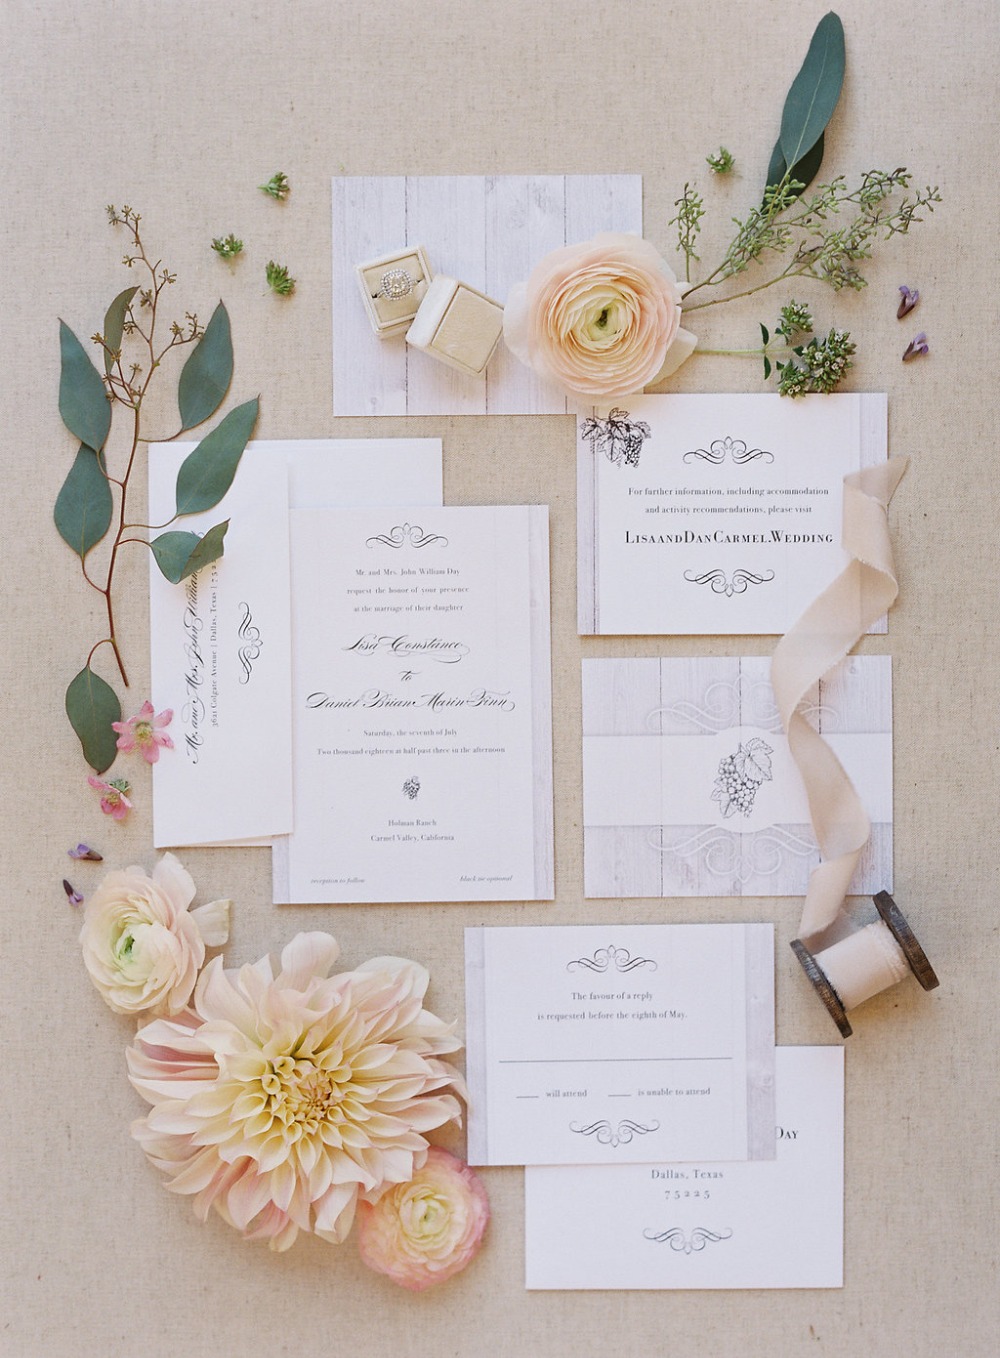 a chic yet rustic wedding invitation suite